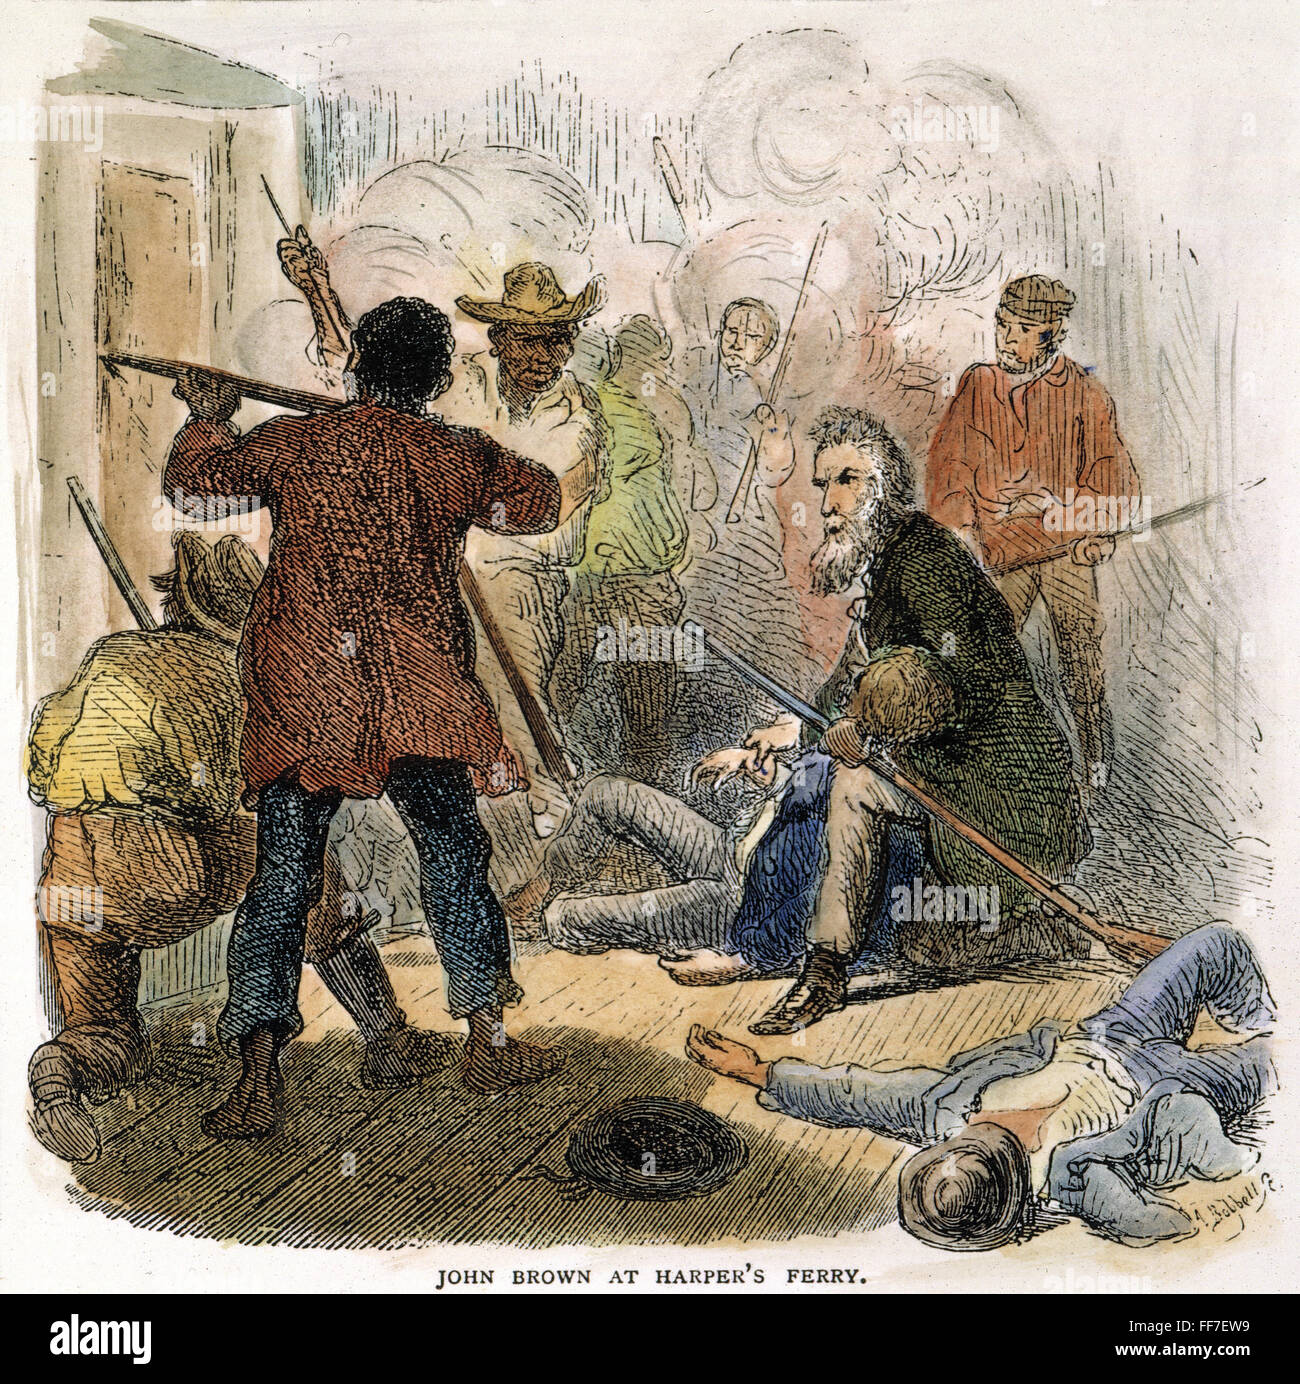 HARPER'S FERRY, 1859. /nInside the Armory at Harper's Ferry, Virginia, where John Brown and his men were trapped by the fire of the U.S. Marines under the command of Colonel Robert E. Lee, 18 October 1859. Contemporary colored engraving. Stock Photo